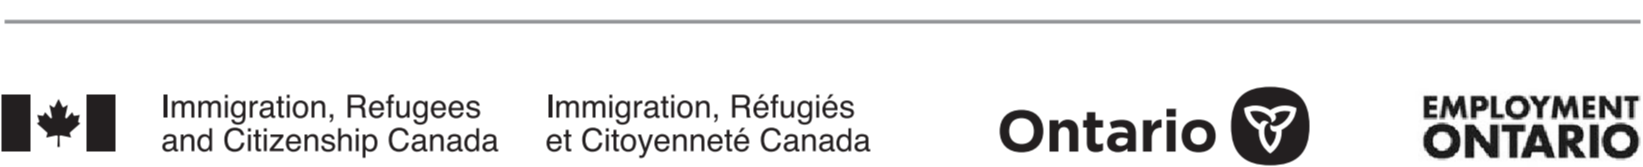 Adult Education is funded by Immigration, Refugees and Citizenship Canada, Government of Ontario and Employment Ontario.